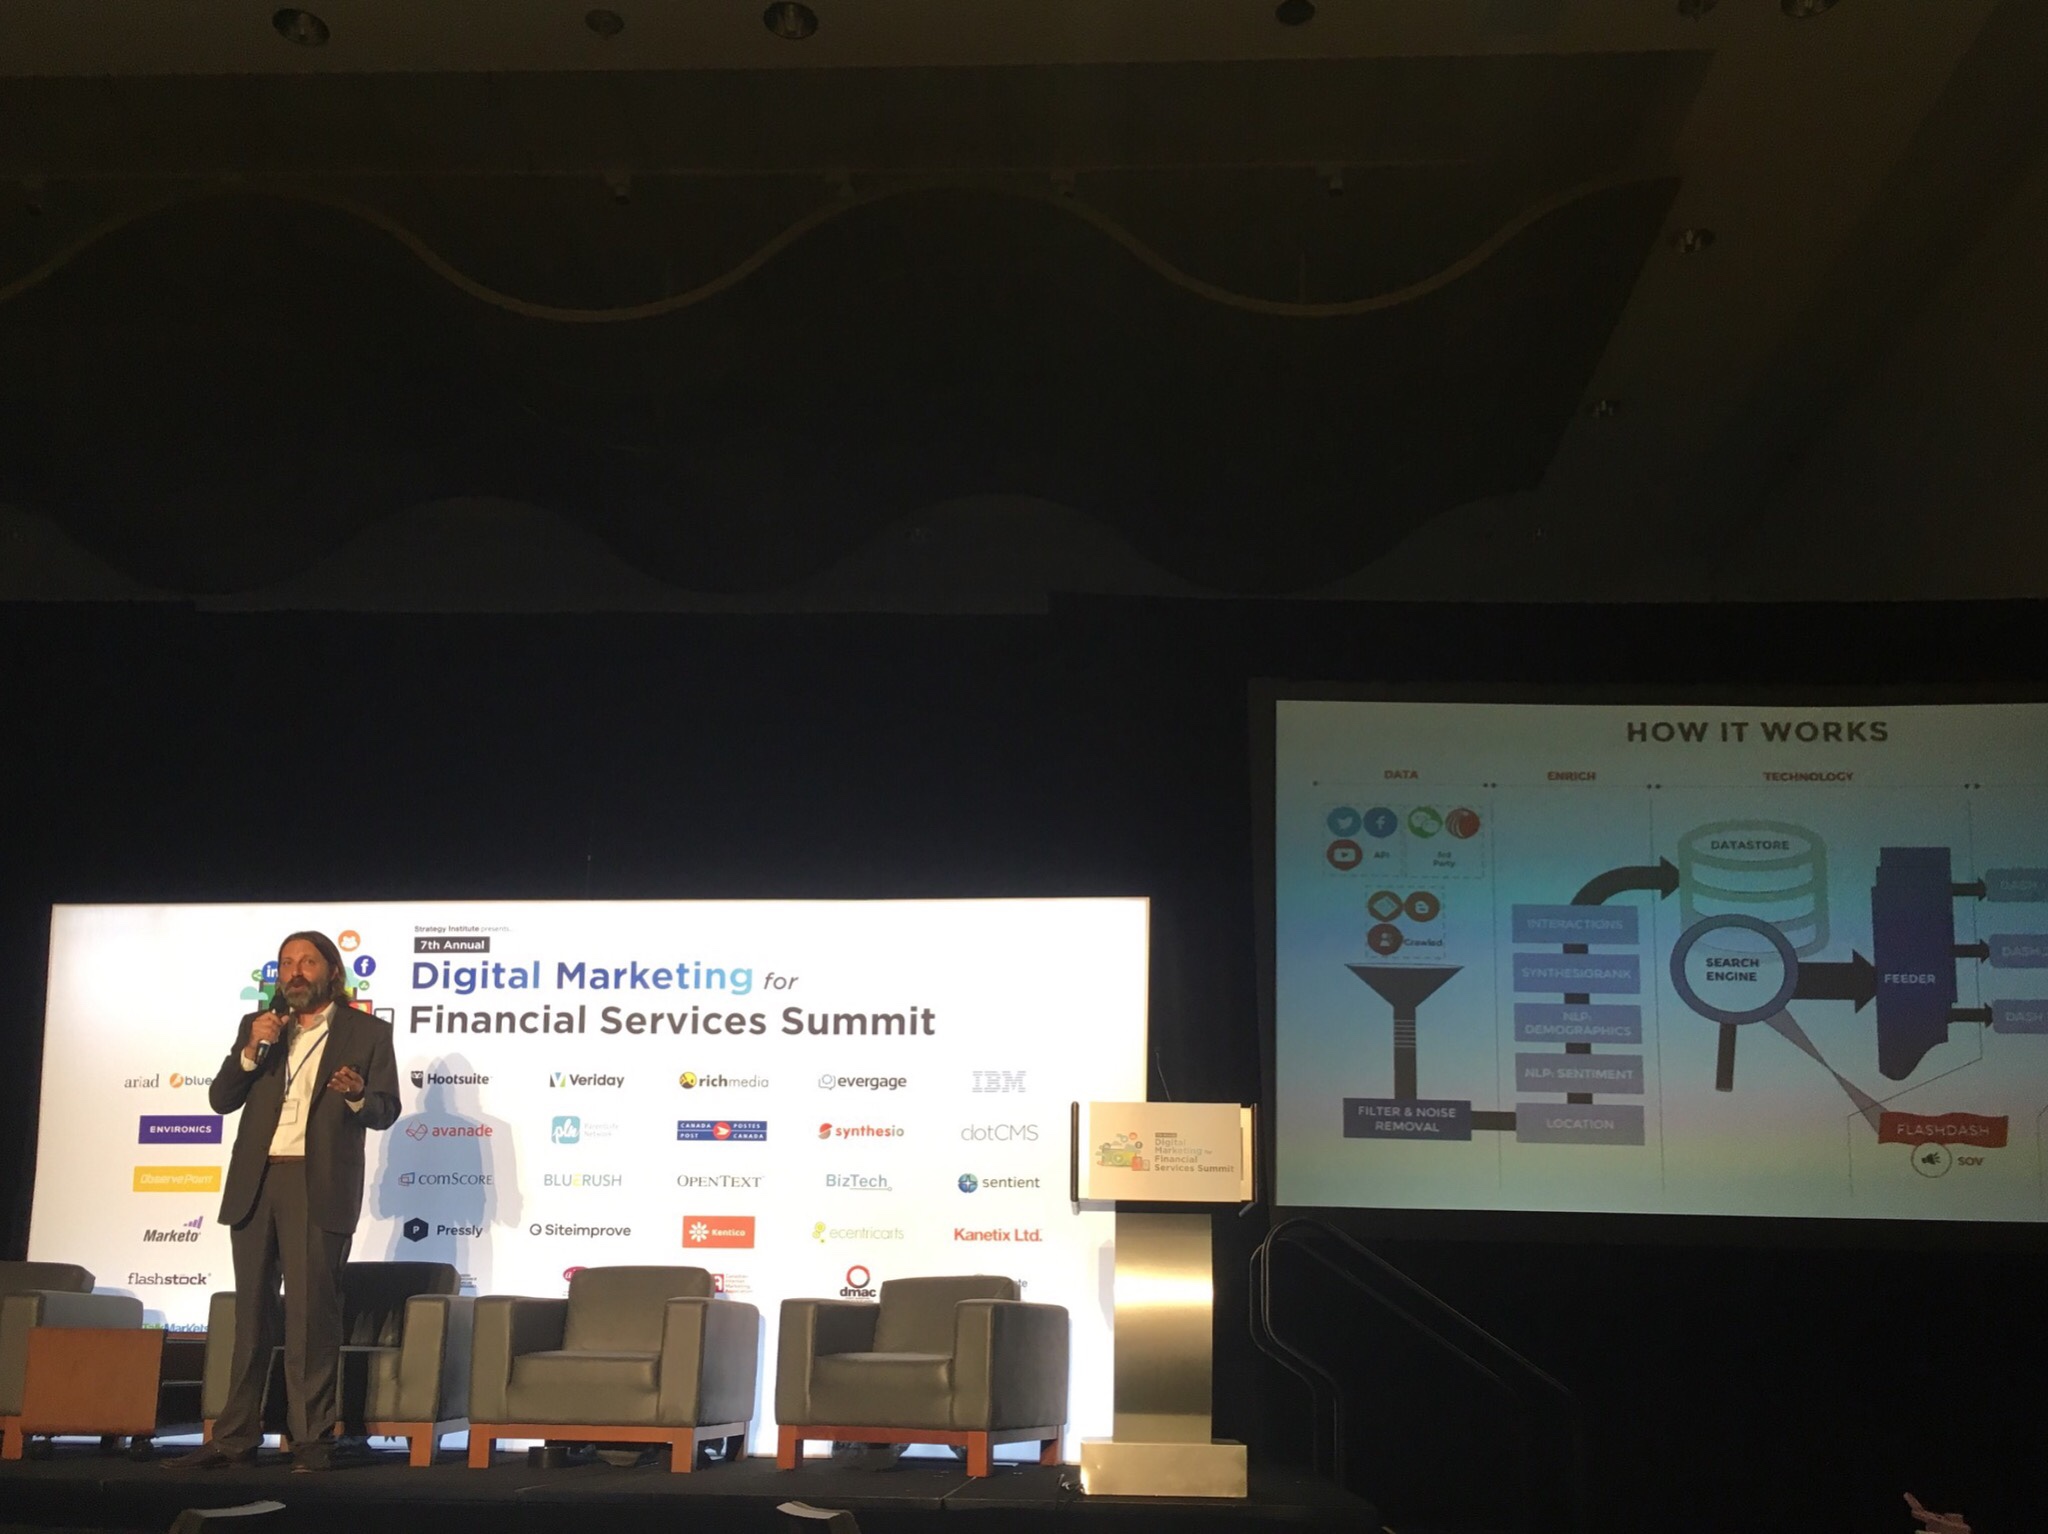 Digital Marketing for Financial Services Summit Social Data Overview